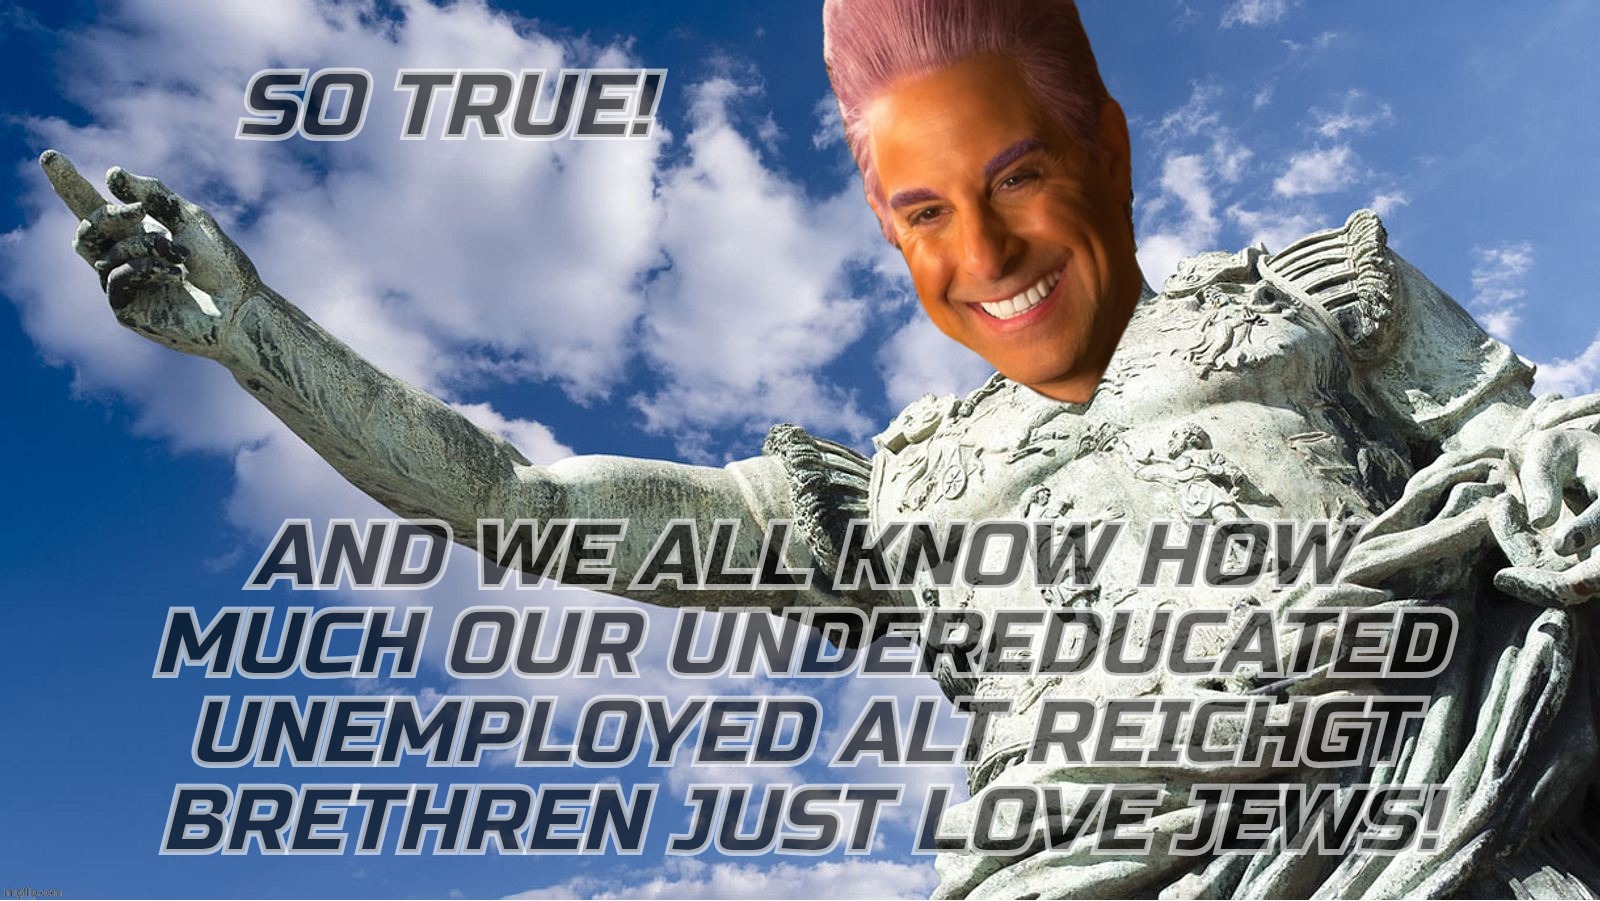 Caesar Flickerman | SO TRUE! AND WE ALL KNOW HOW
MUCH OUR UNDEREDUCATED UNEMPLOYED ALT REICHGT BRETHREN JUST LOVE JEWS! | image tagged in caesar flickerman | made w/ Imgflip meme maker